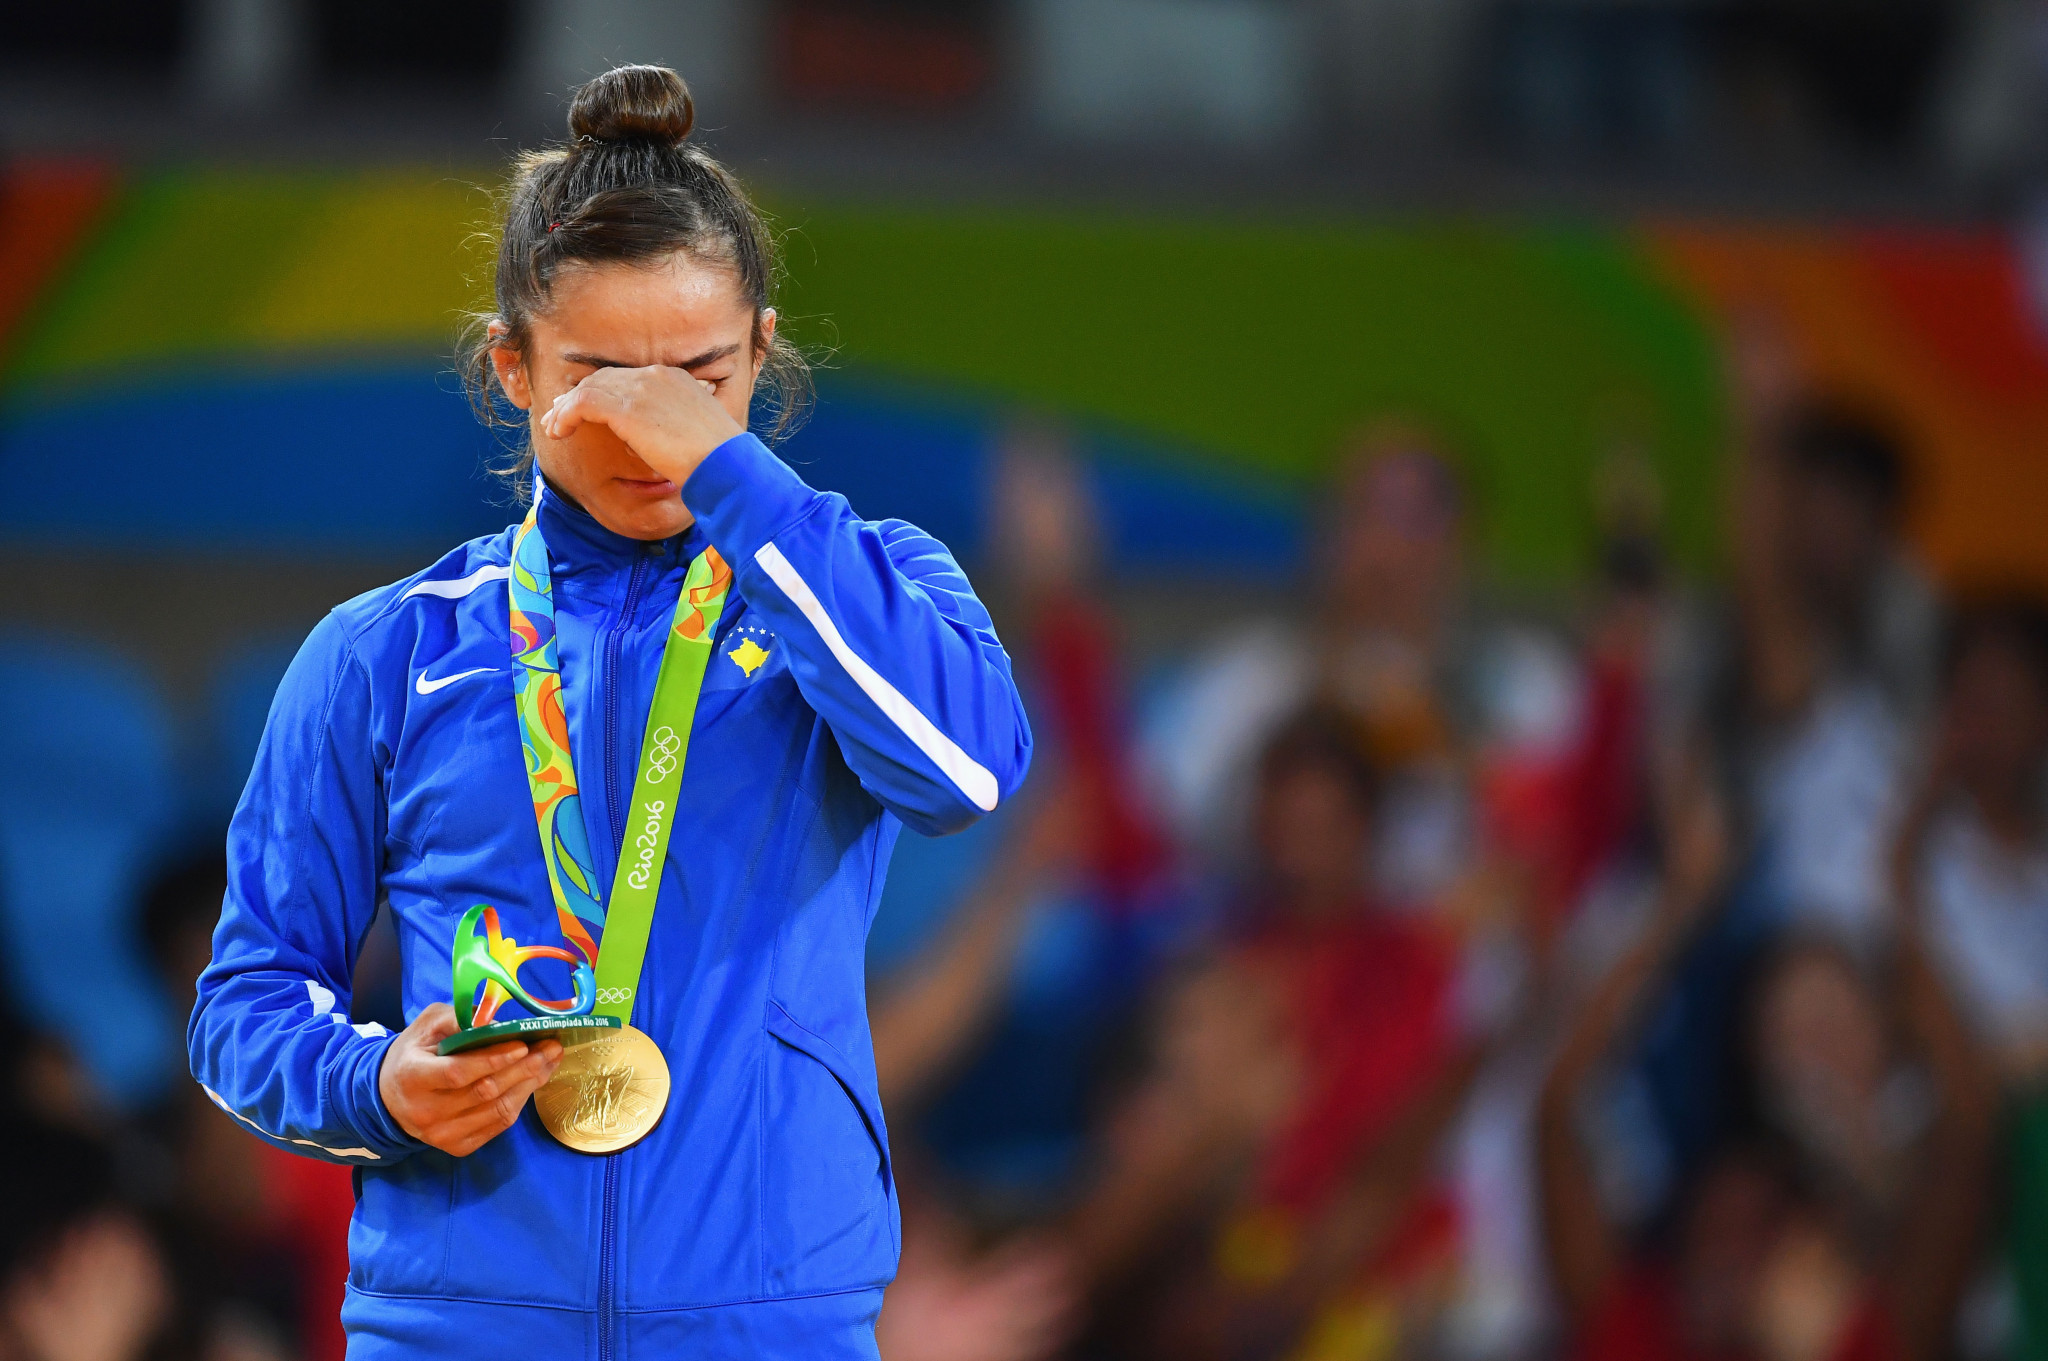 Majlinda Kelmendi was Kosovo's first Olympic gold medallist at Rio 2016 in the women's under-52kg judo ©Getty Images